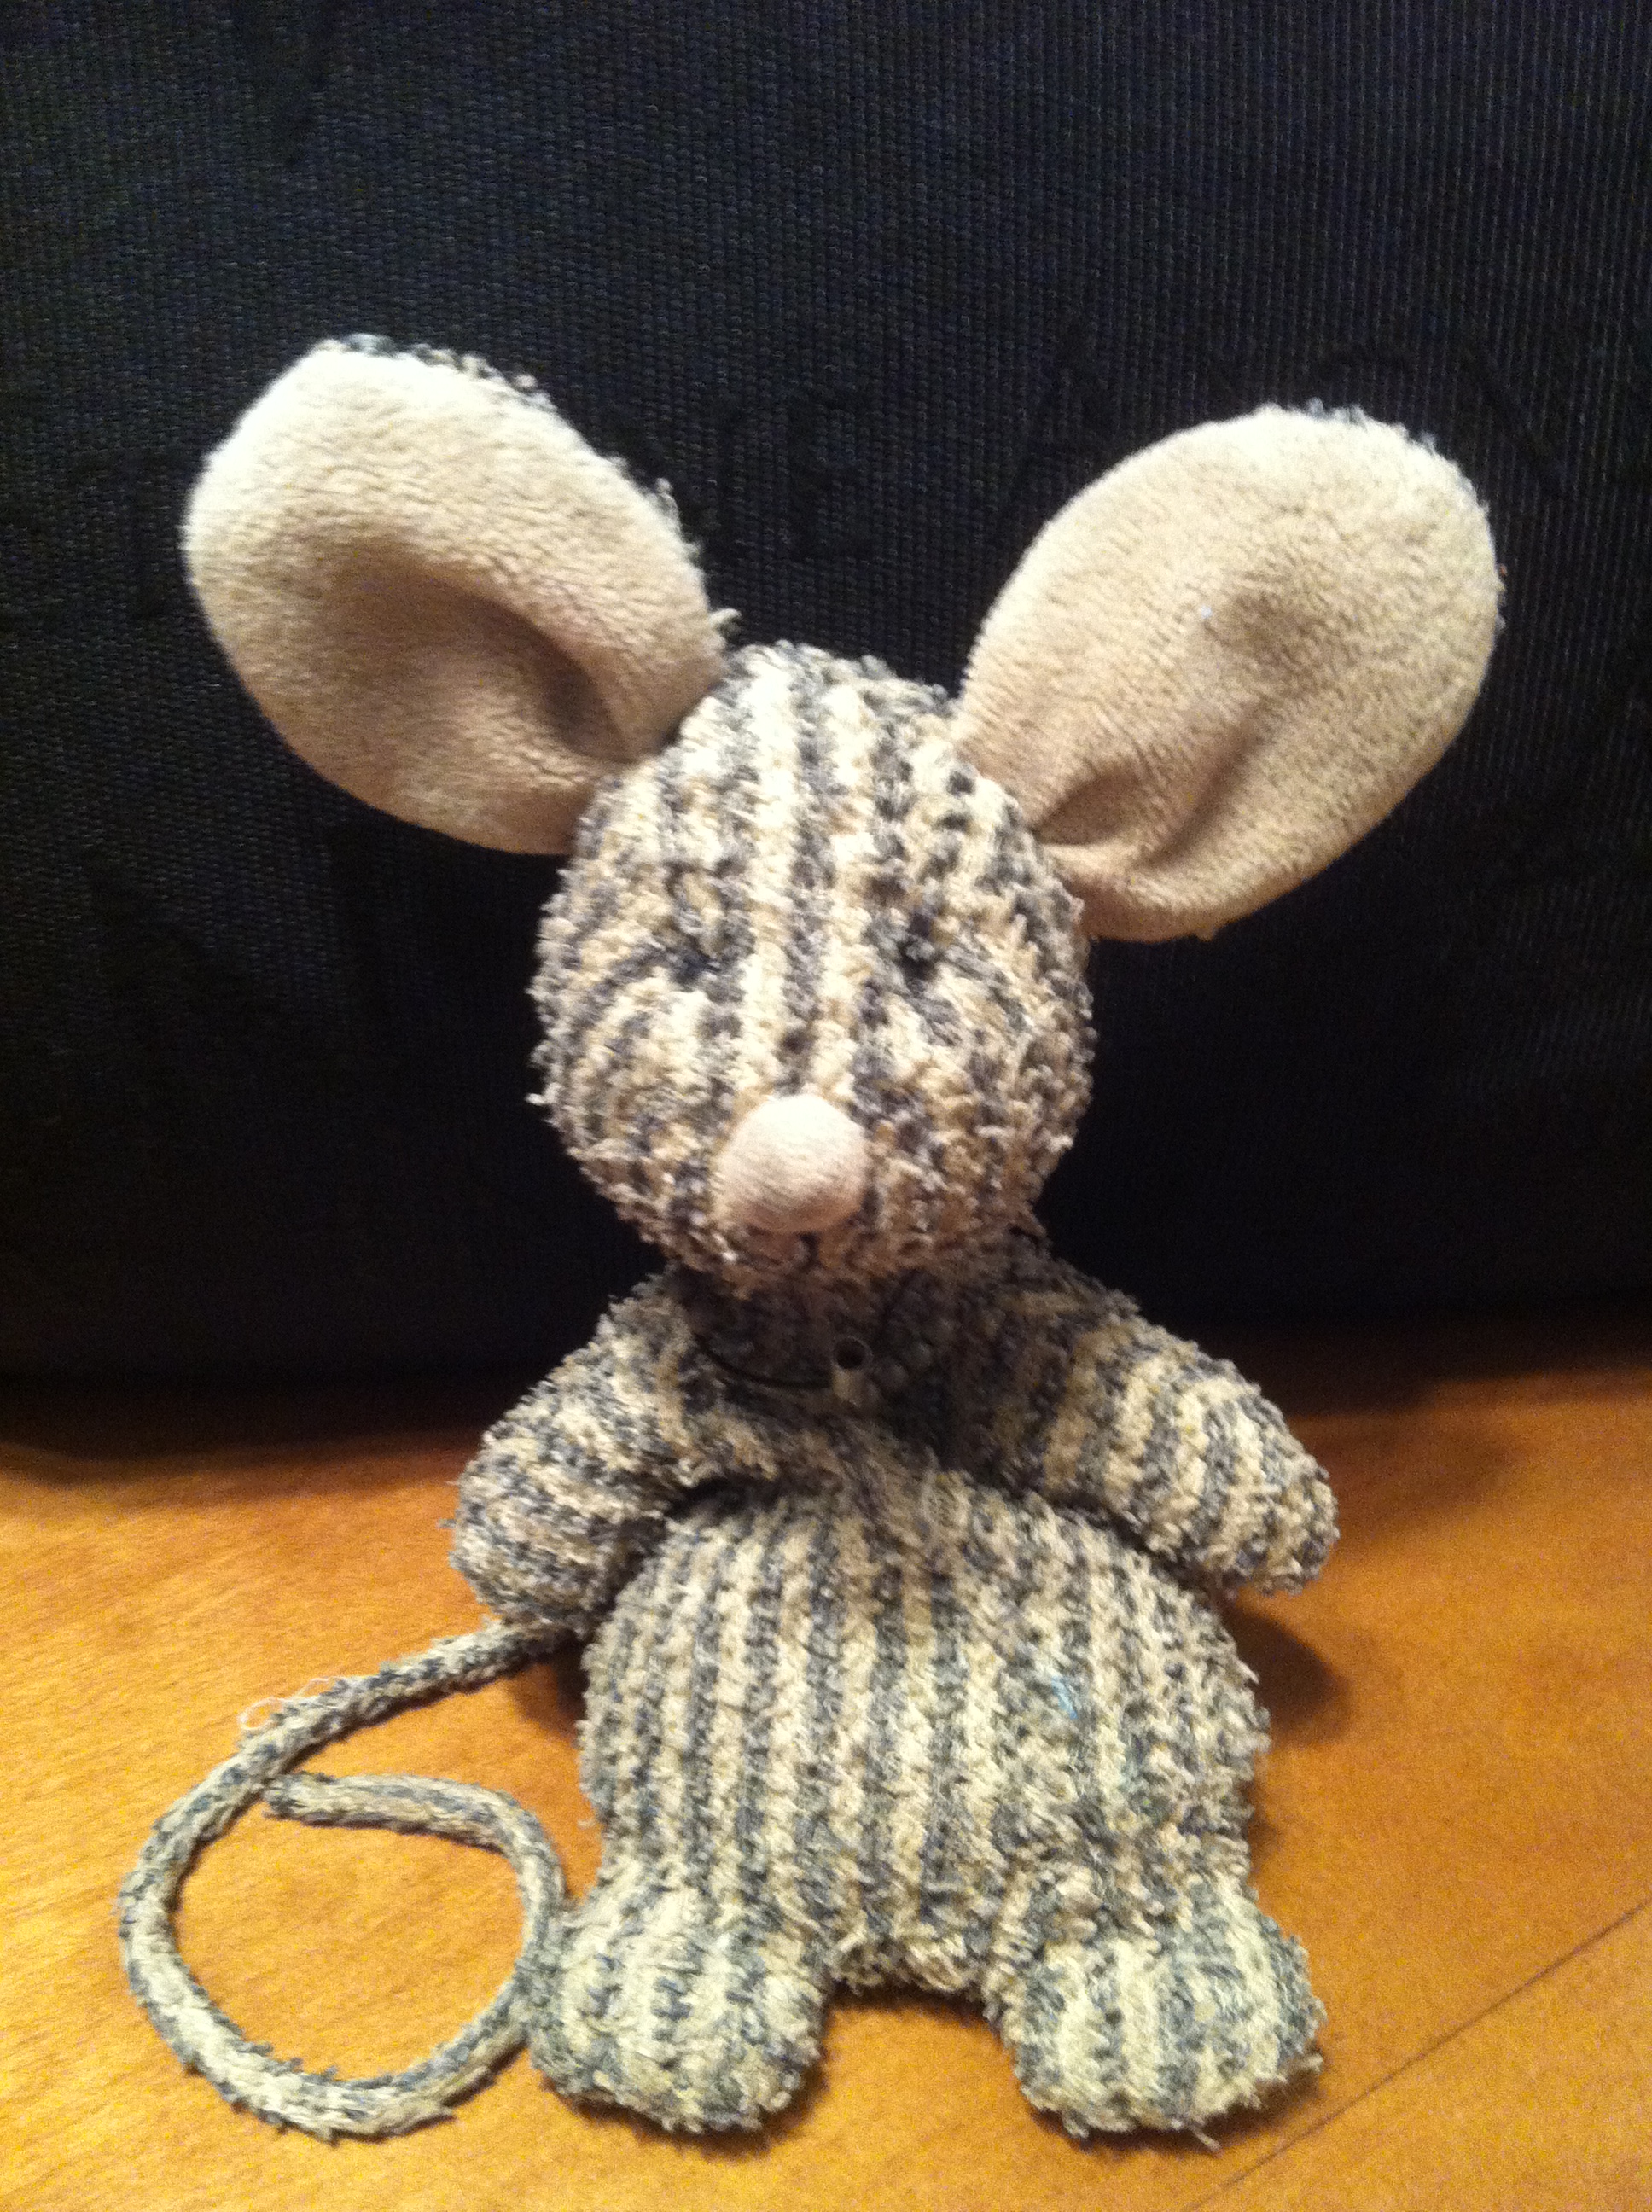 Mousy. Kirstin's mouse given to her at age 1 by her great grandmother before she died. He can be seen in her last two movies, A Valentine's Date and A Christmas Wish:)